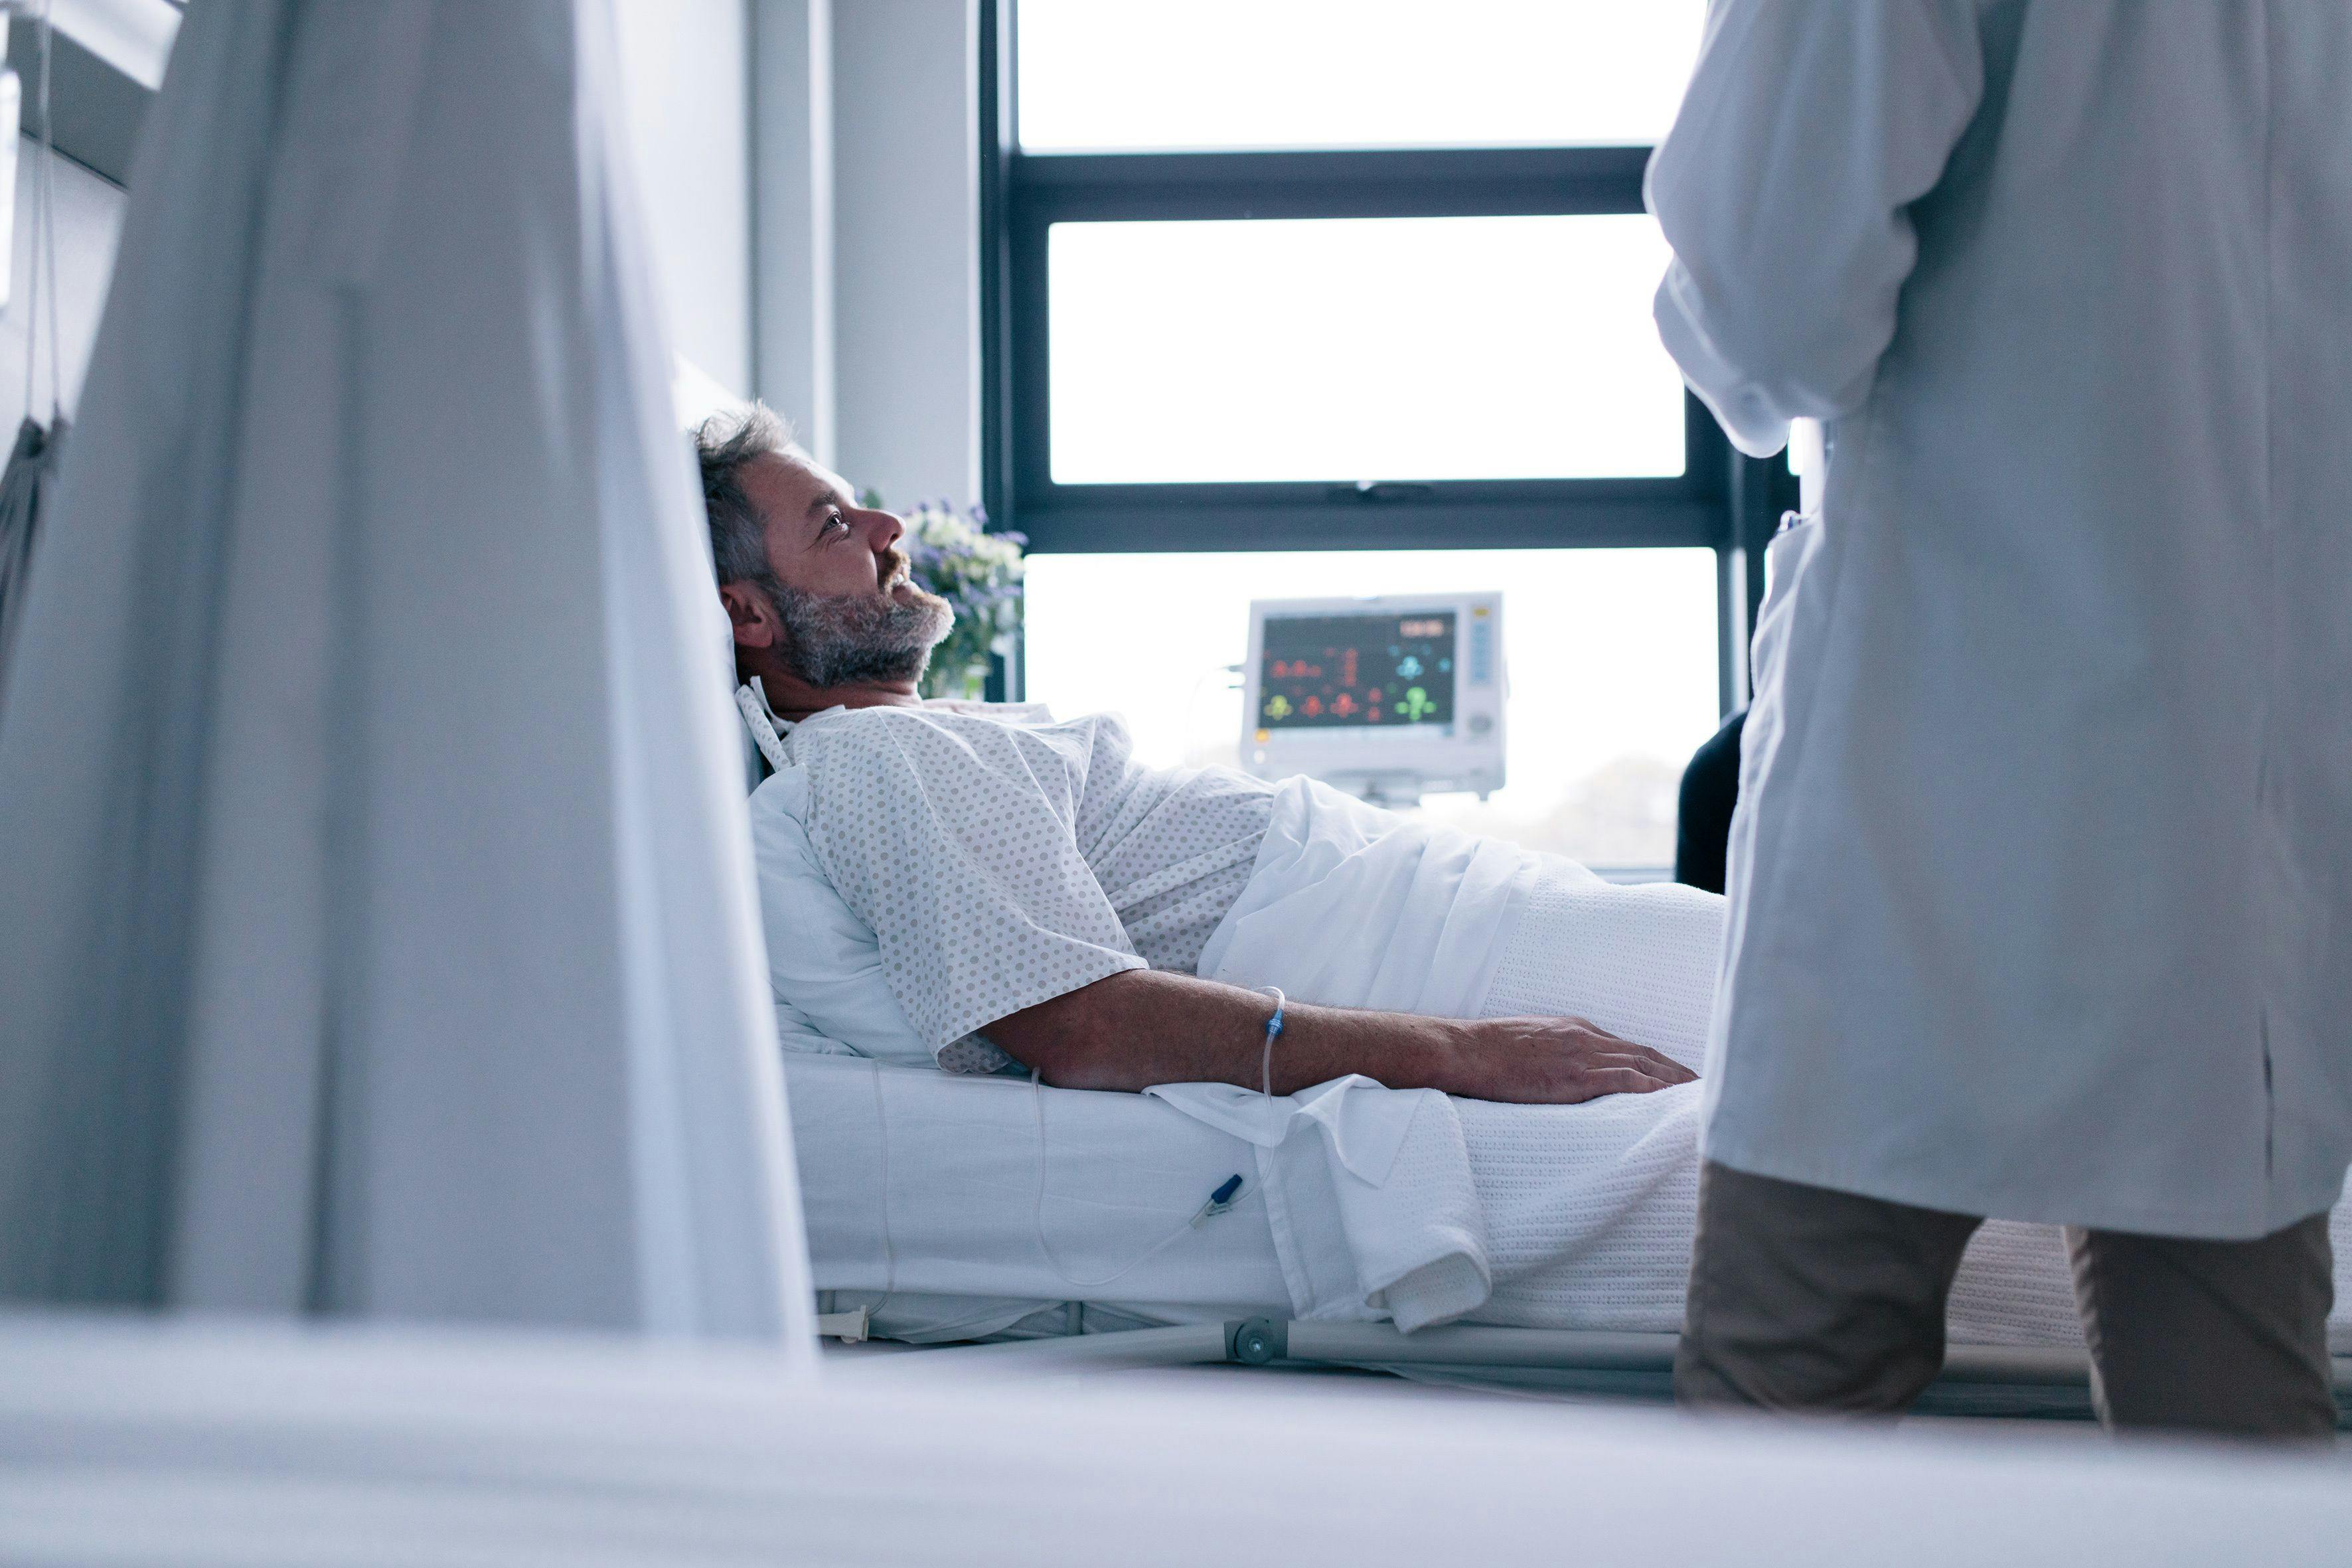 One in four hospital patients suffers adverse events, and some can be avoided